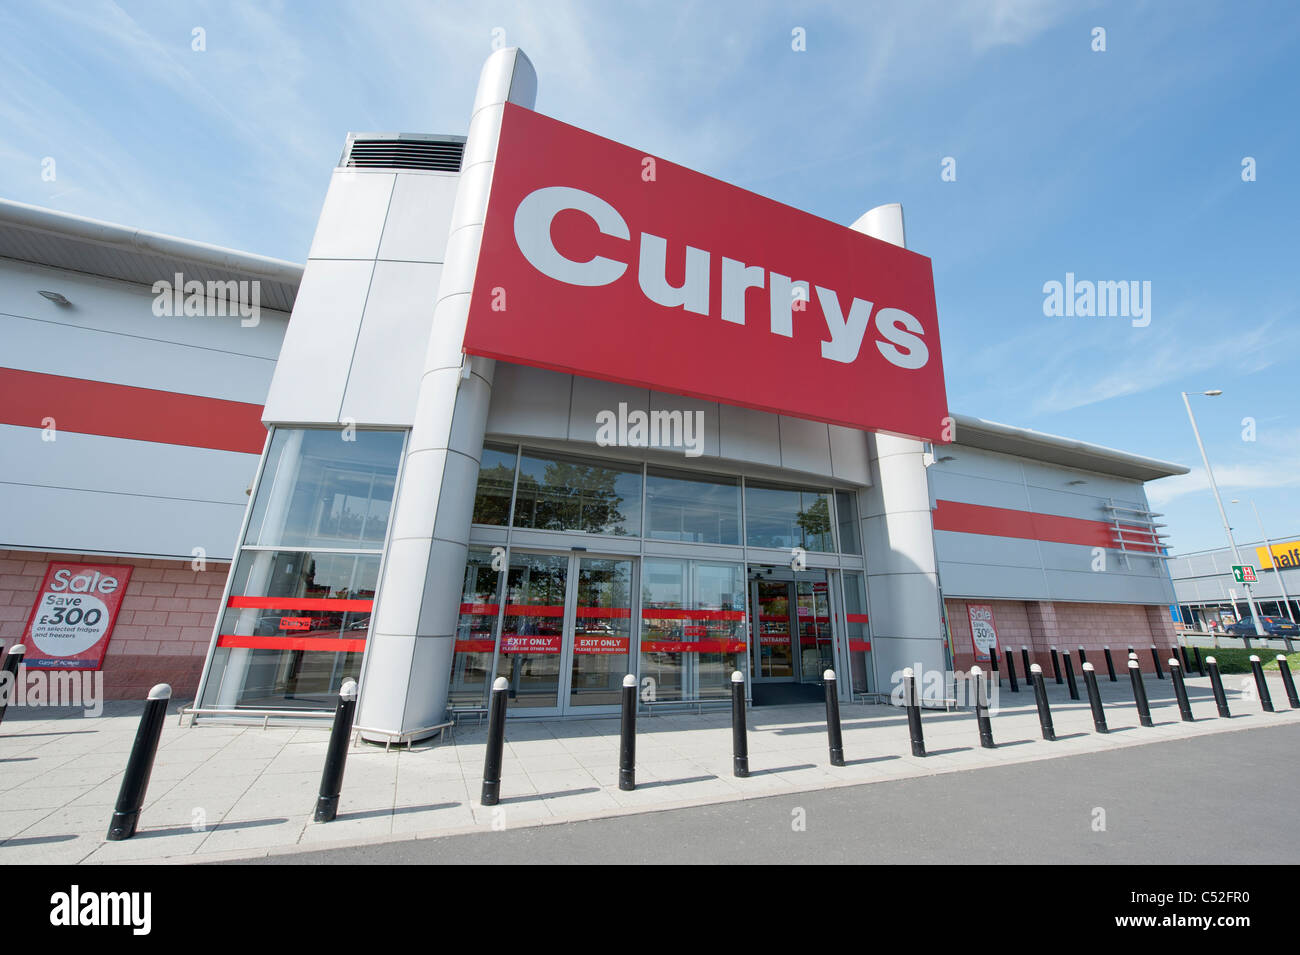 The storefront of the electrical retailer Currys on a retail park, Manchester. (Editorial use only). Stock Photo